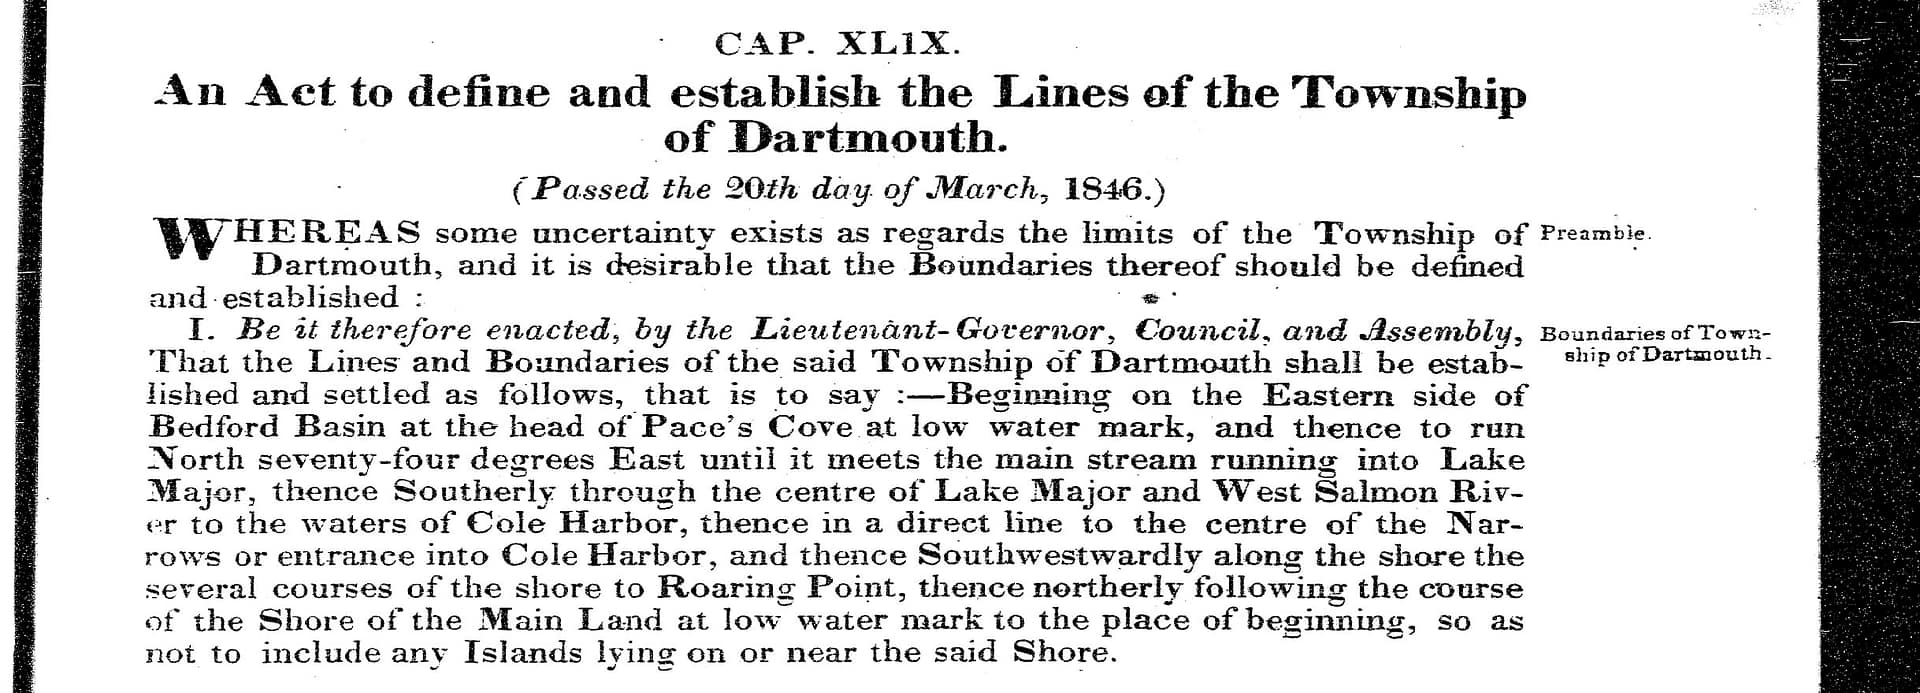 An Act to define and establish the Lines of the Township of Dartmouth,  1846 c49